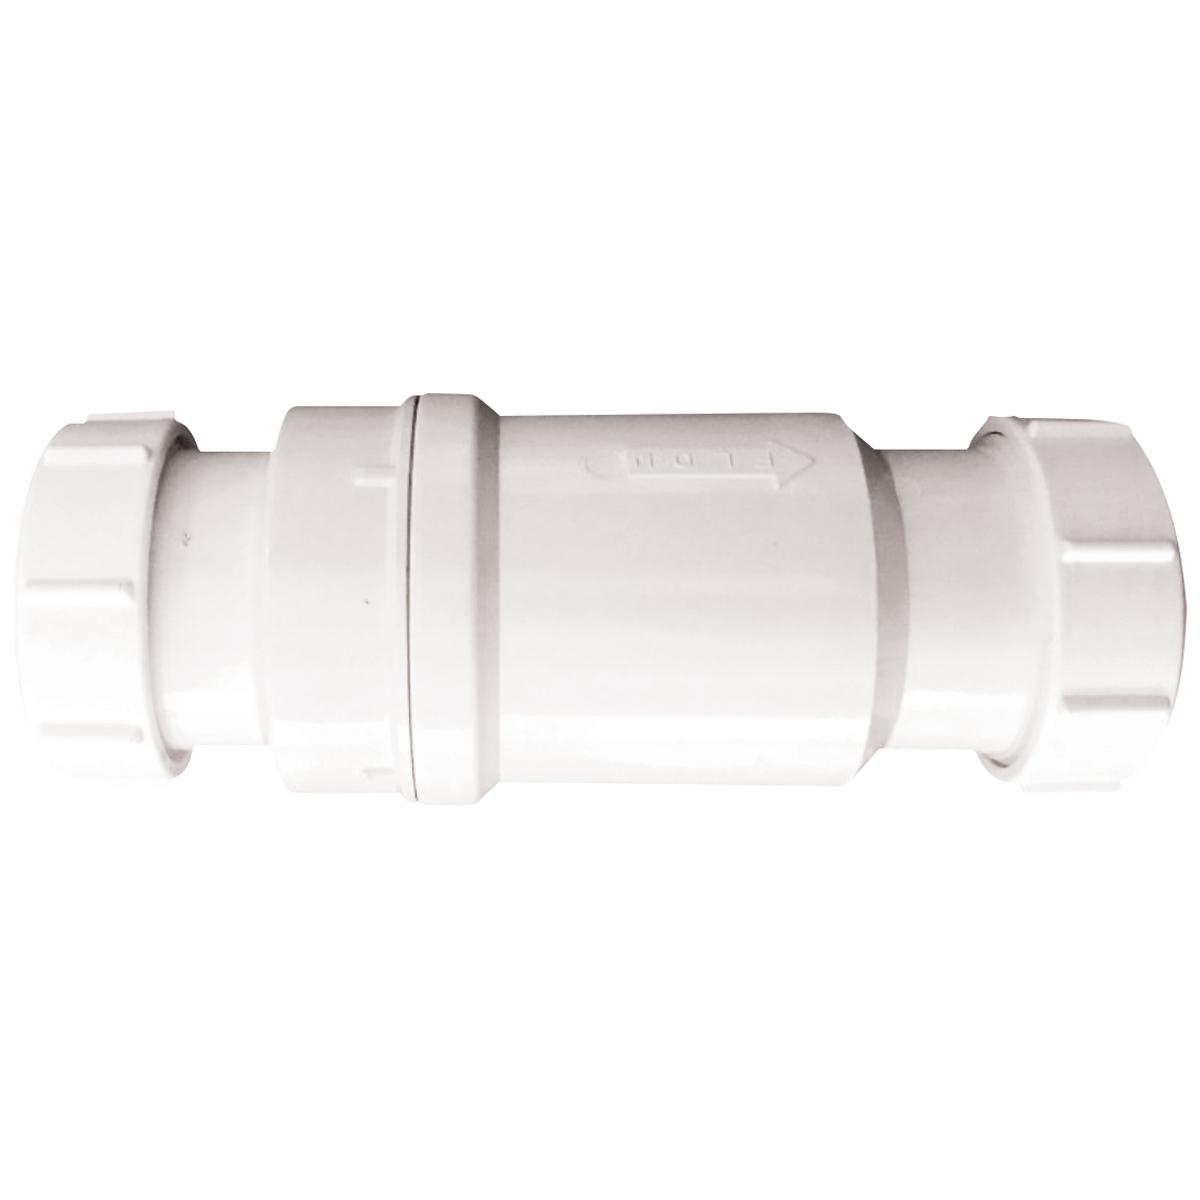 MACVALVE 5 40MM UNIVERSAL INLET/OUTLET